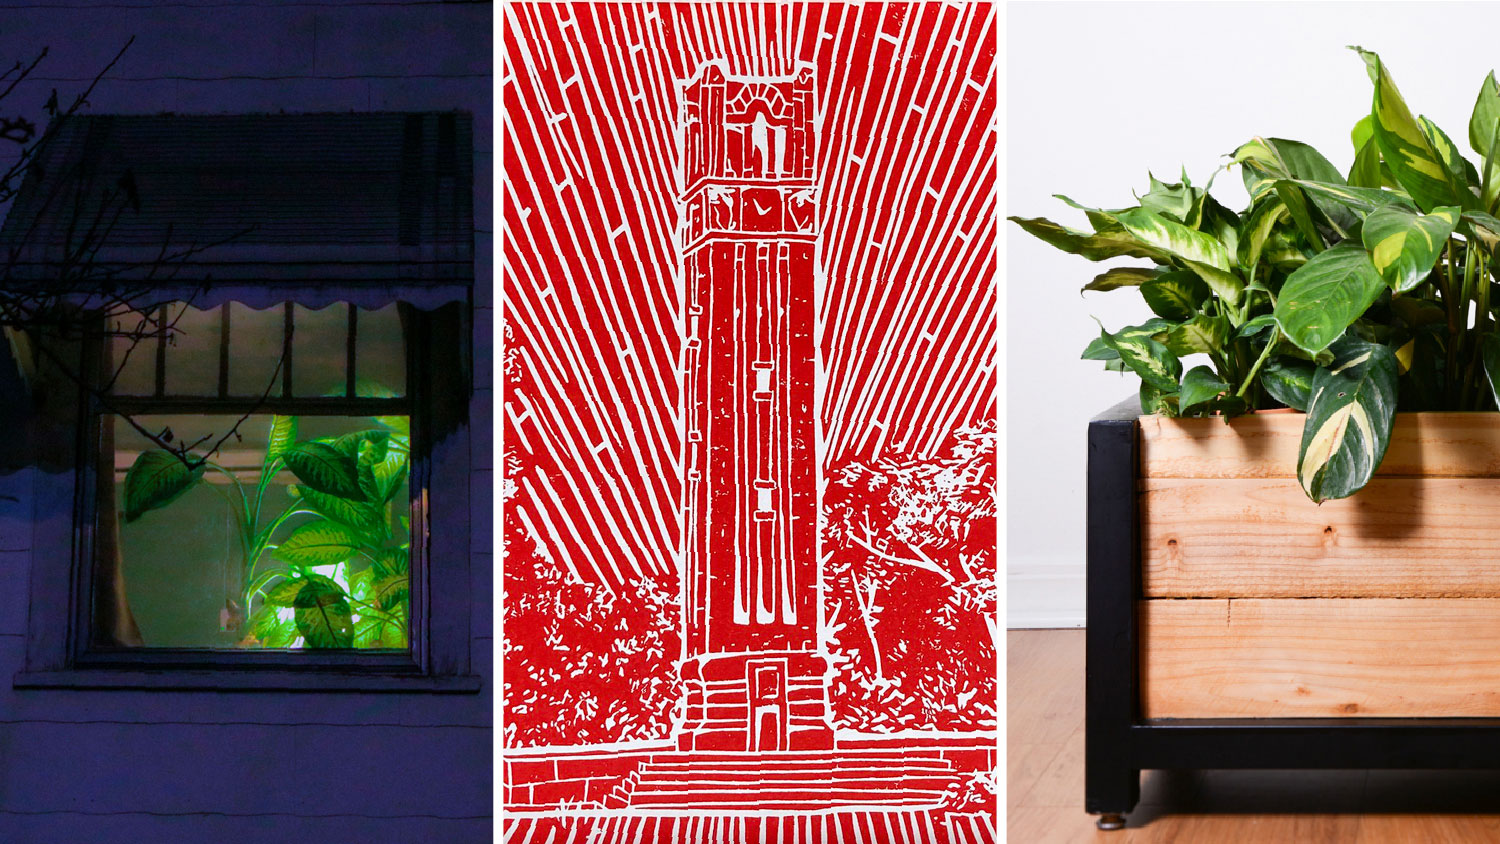 2021 Arts NC State Visual Artist Award winners (L-R): “A Dream of You” by Martina Gonzalez Bertello, “Beaming Belltower” by Abby Lewis, steel and cedar planter box by Connor Gary.